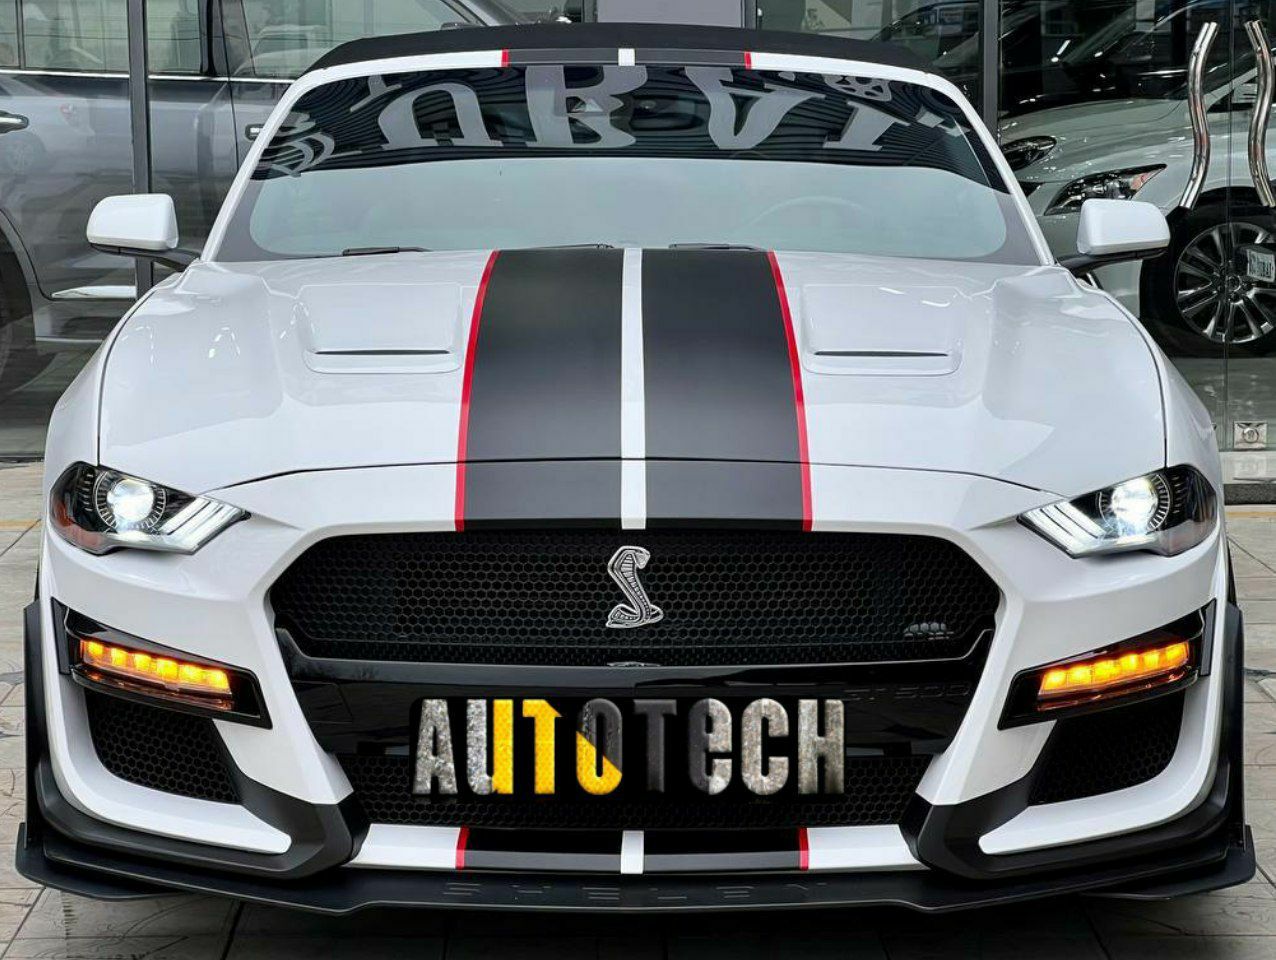 Ford Mustang Shelby body kit
Год 2021